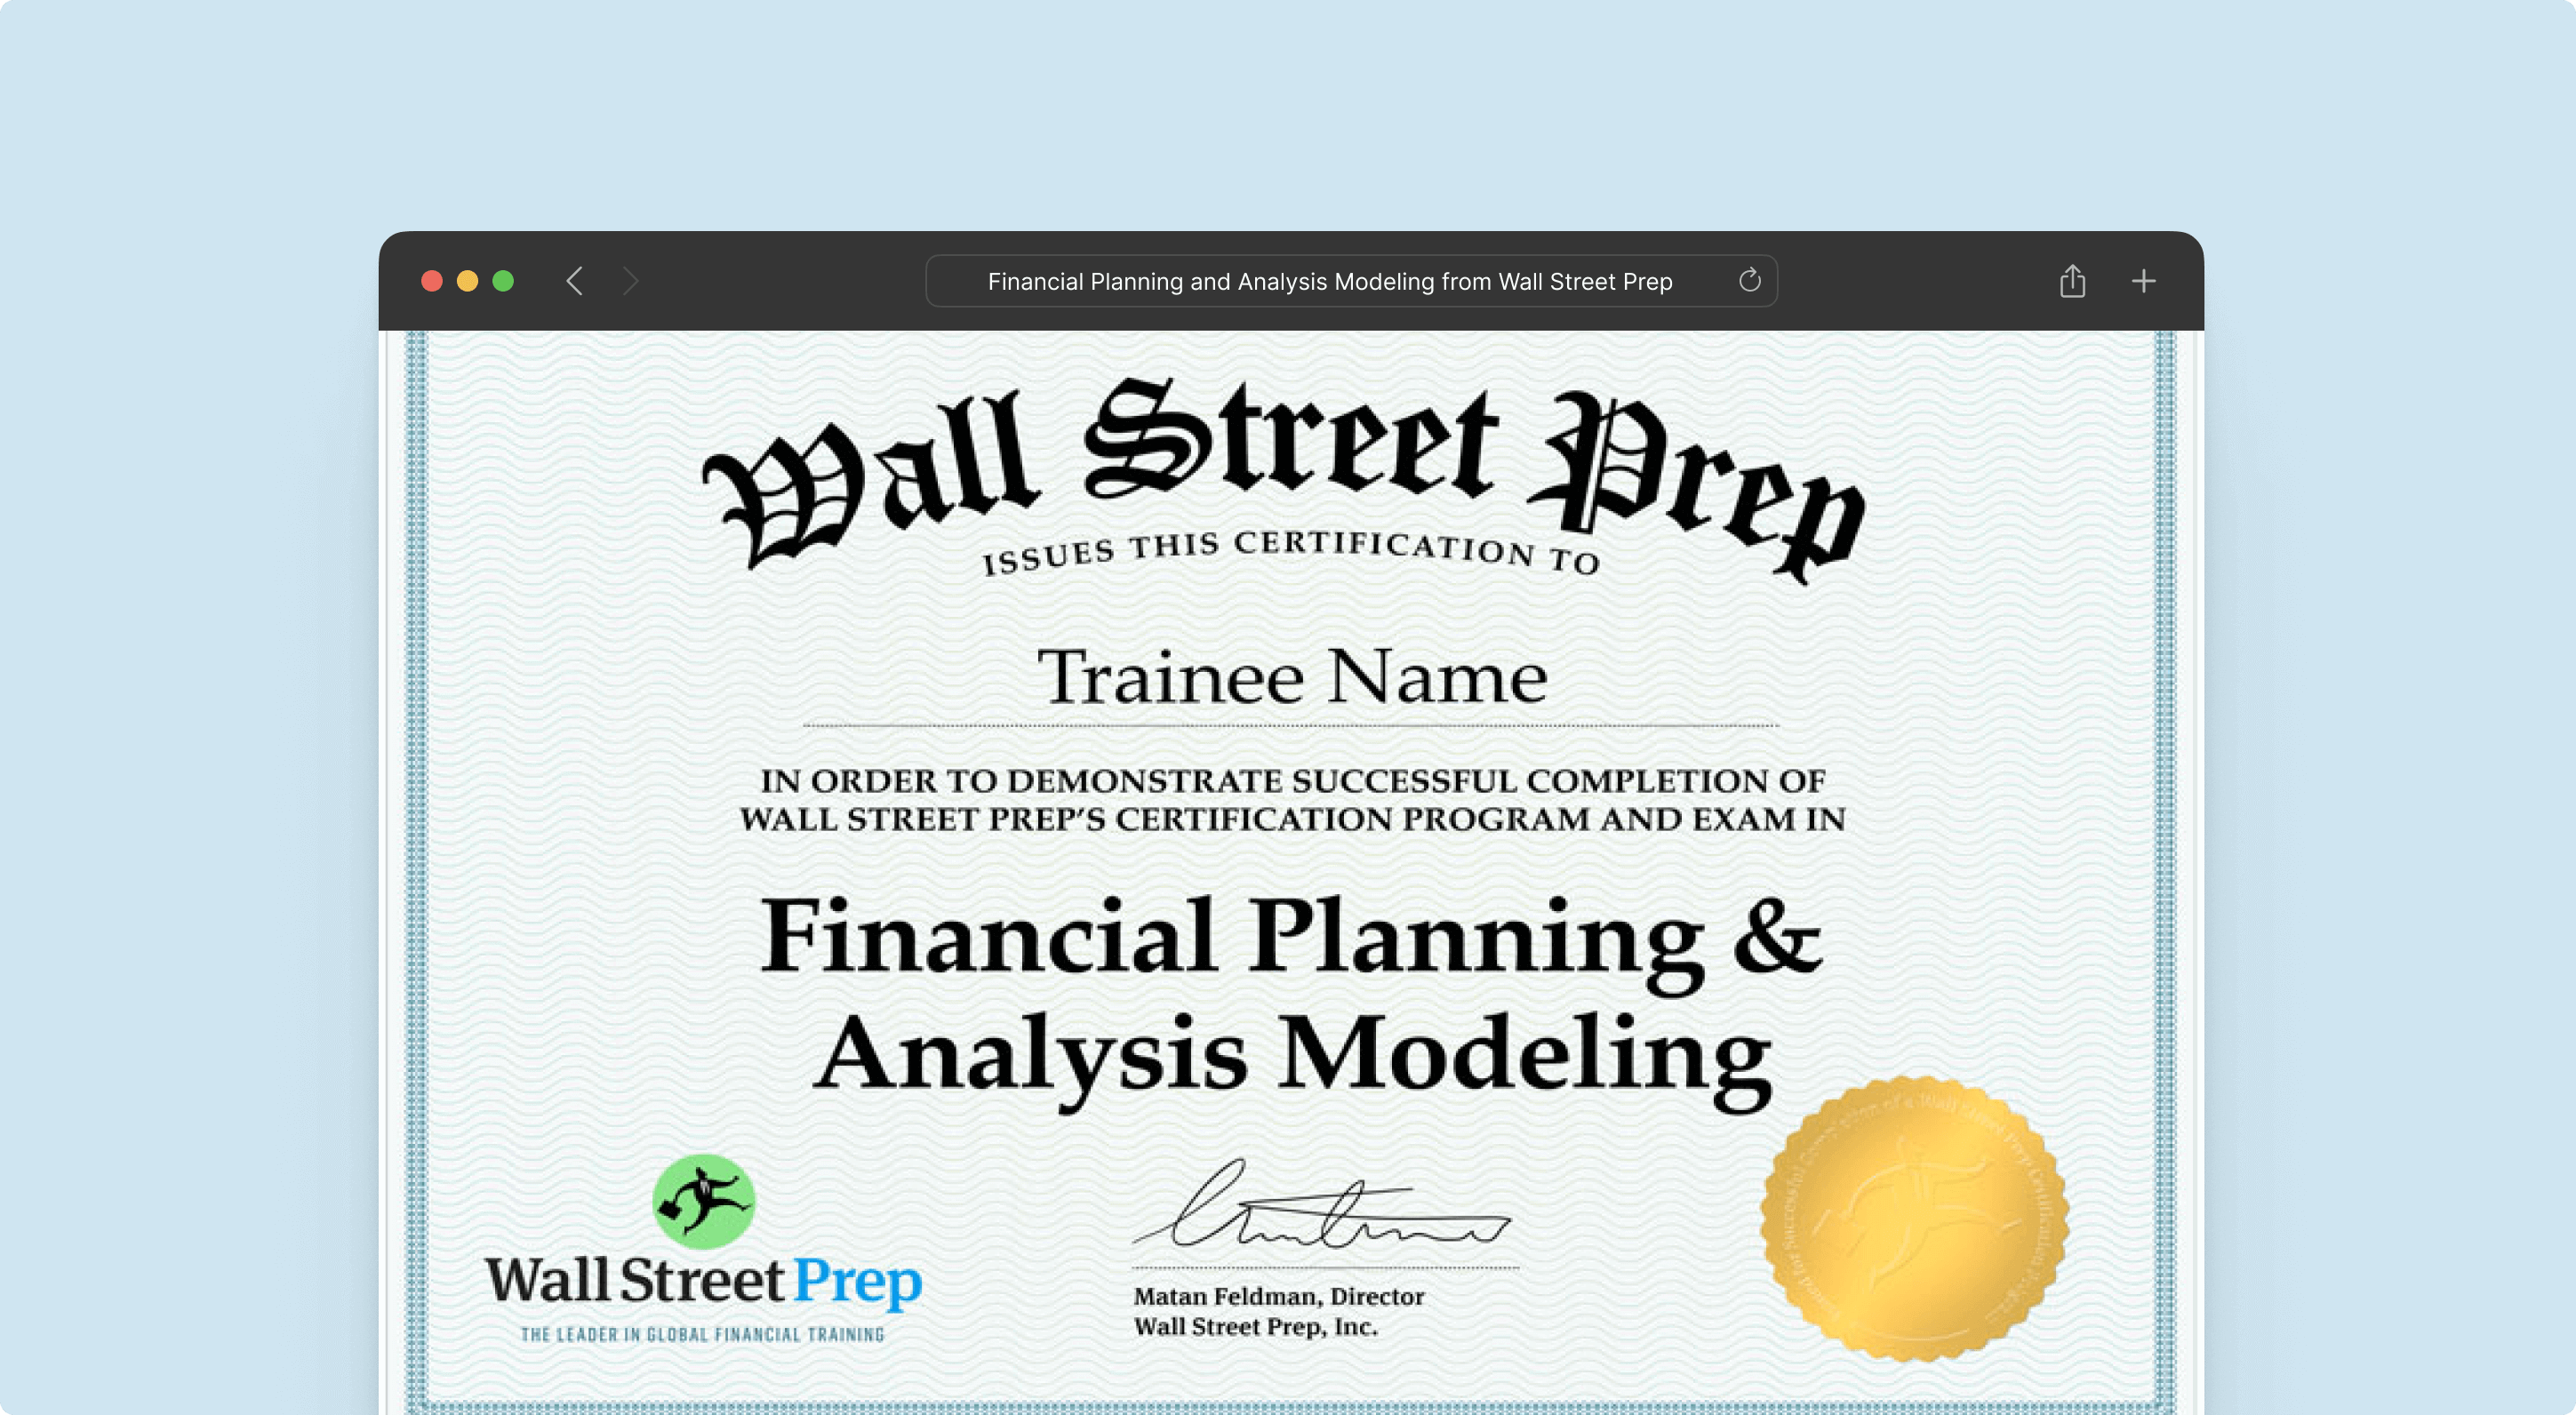 Financial planning and analysis modeling certification fpamc wall street prep